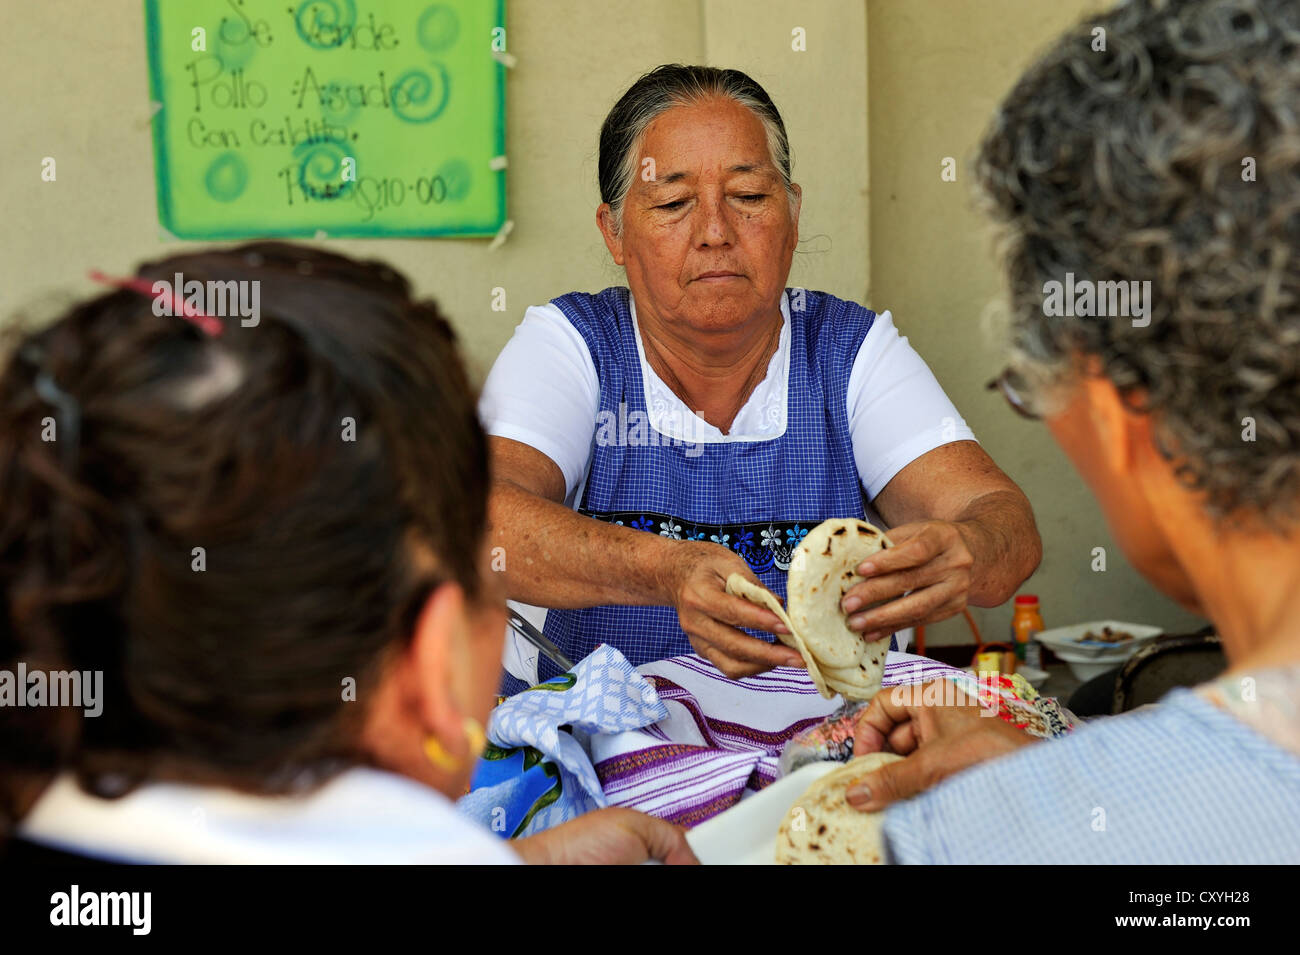 Woman offering tortillas for sale at a stand, feast on the day of St. Anthony, Dios Con Nosotros church parish, El Mesquital Stock Photo